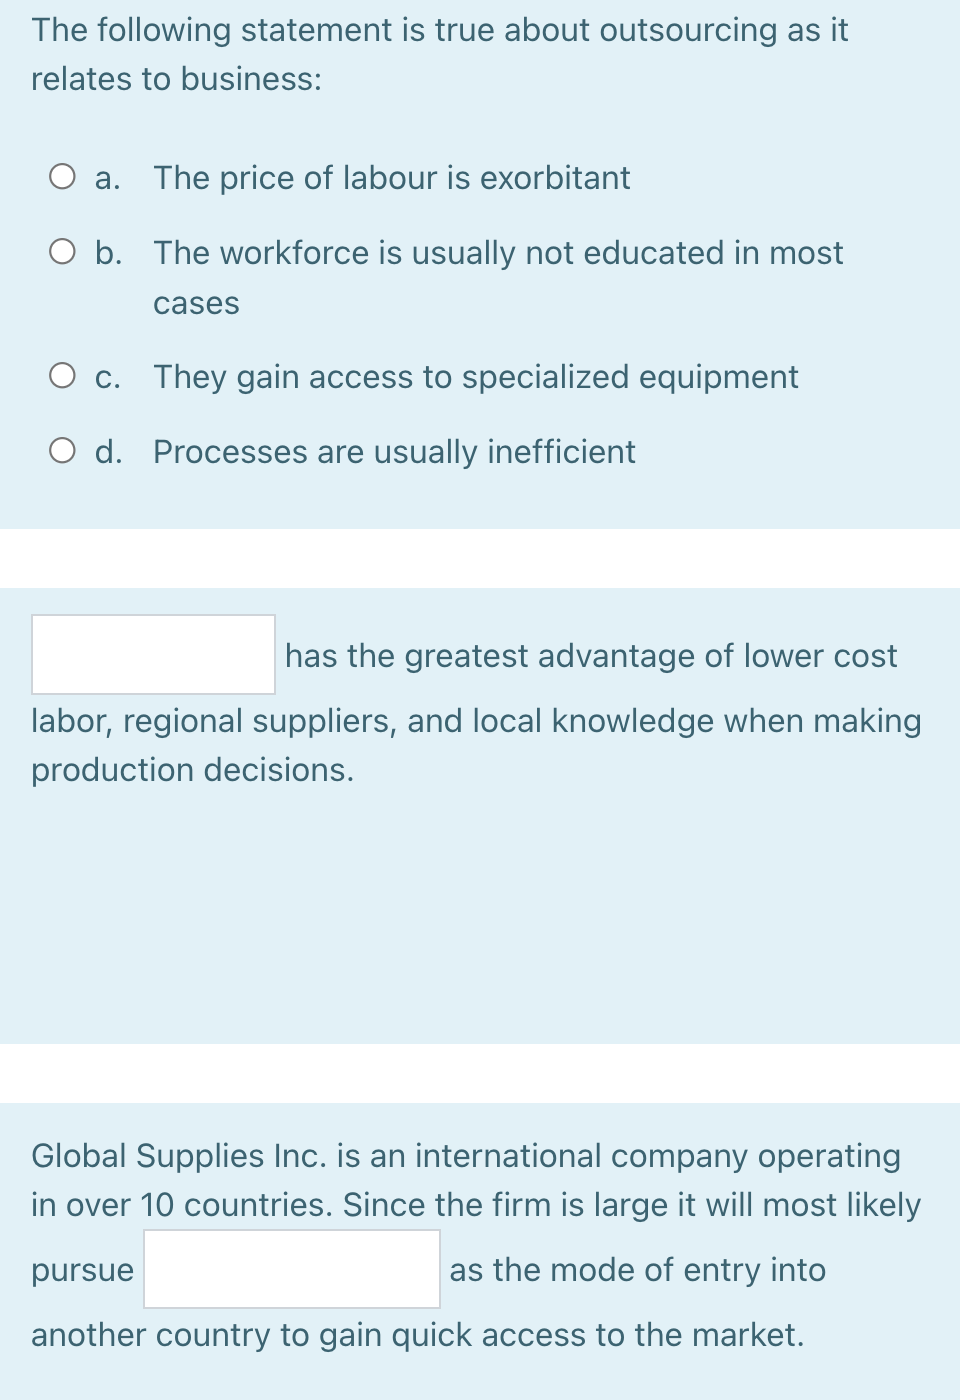 The following statement is true about outsourcing as it
relates to business:
а.
The price of labour is exorbitant
O b. The workforce is usually not educated in most
cases
O c. They gain access to specialized equipment
O d. Processes are usually inefficient
has the greatest advantage of lower cost
labor, regional suppliers, and local knowledge when making
production decisions.
Global Supplies Inc. is an international company operating
in over 10 countries. Since the firm is large it will most likely
pursue
as the mode of entry into
another country to gain quick access to the market.
